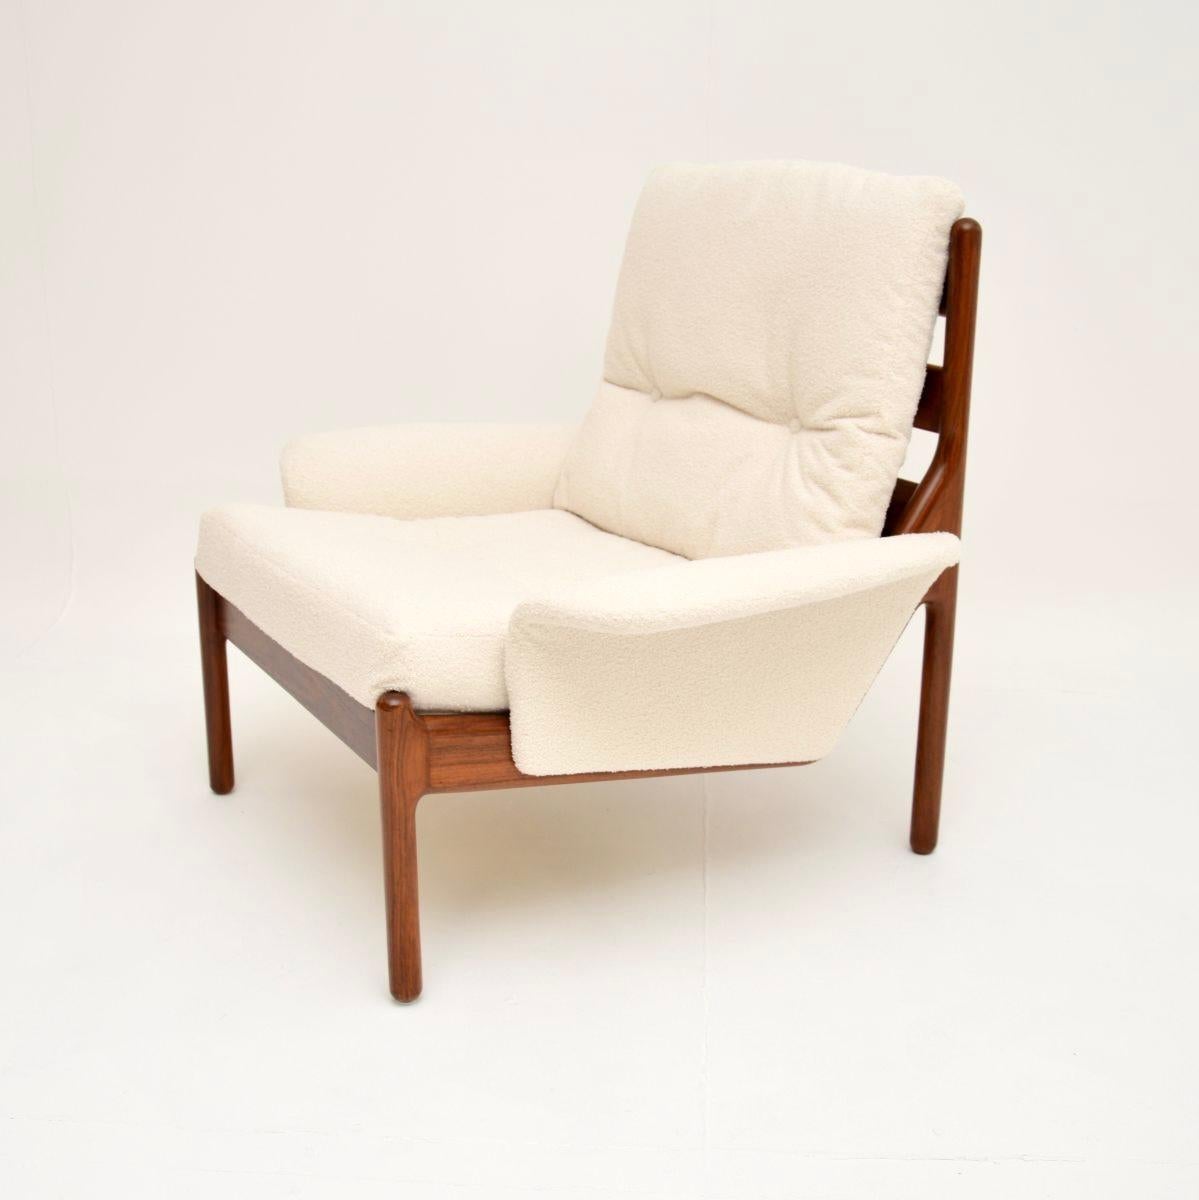 Mid-20th Century Danish Vintage Armchair by Illum Wikkelso For Sale